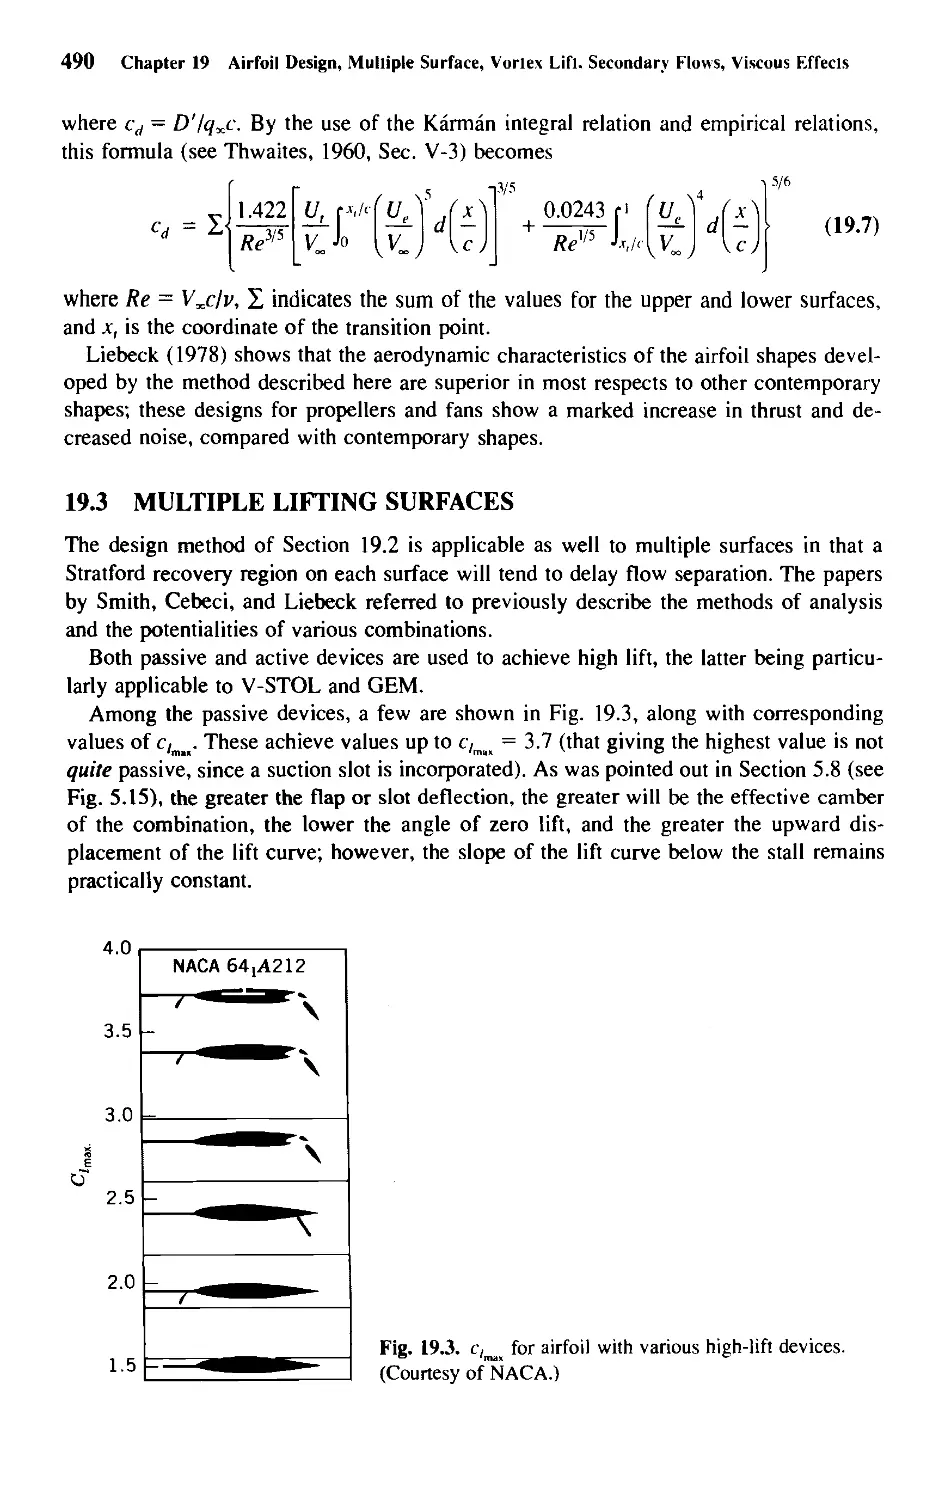 19.3 - Multiple Lifting Surfaces